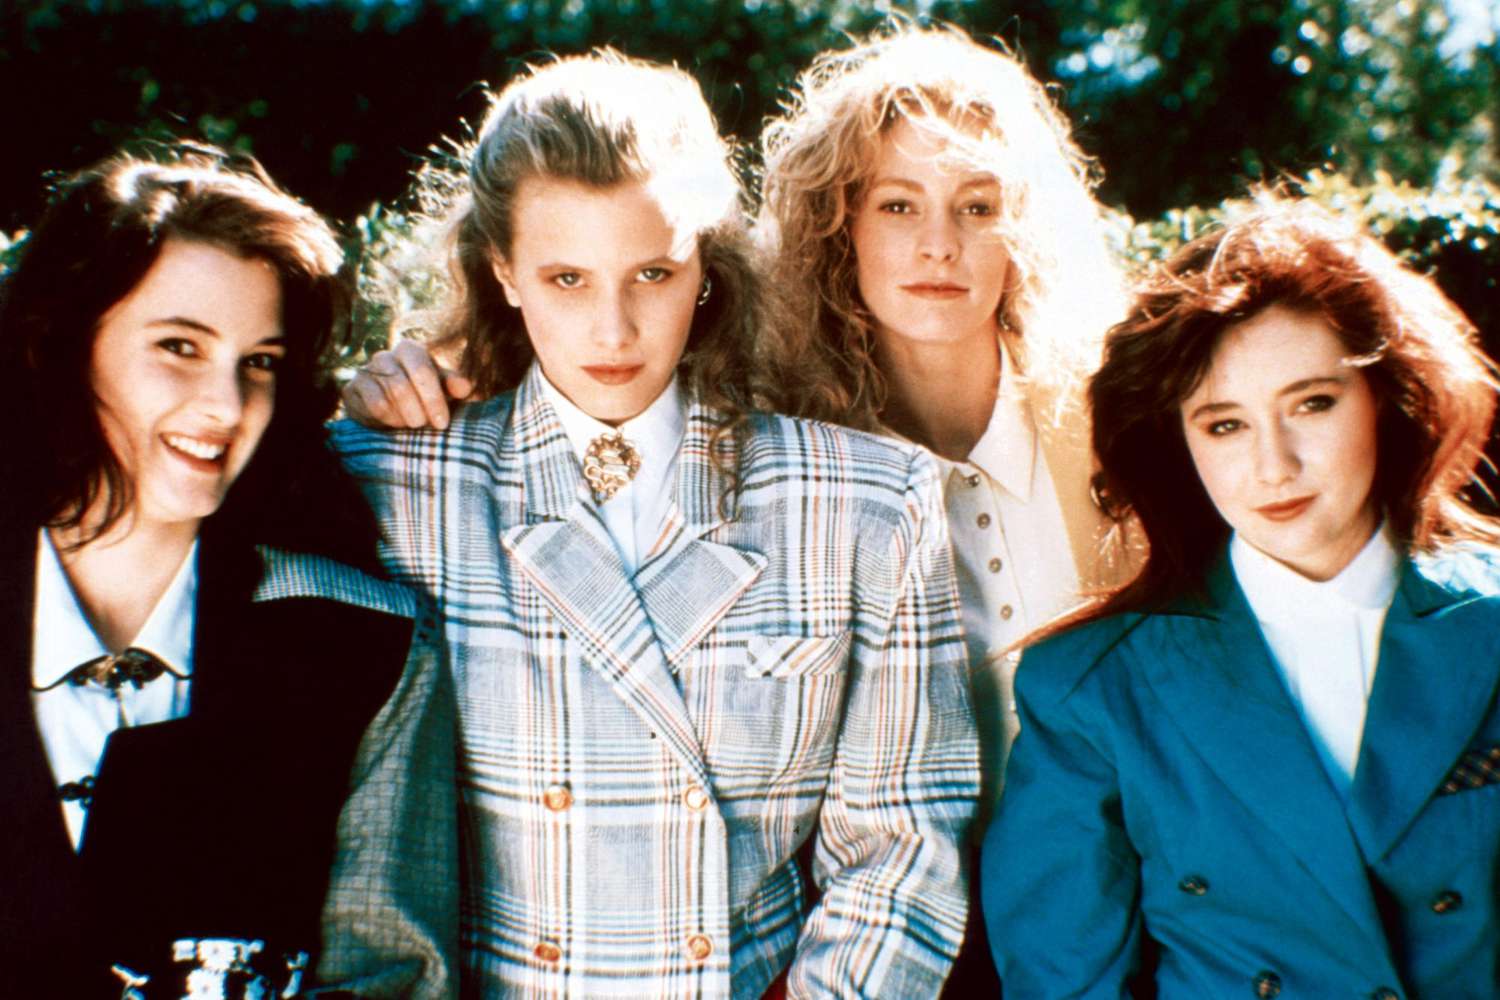 HEATHERS, from left: Winona Ryder, Kim Walker, Lisanne Falk, Shannon Doherty, 1988, © New World/cour